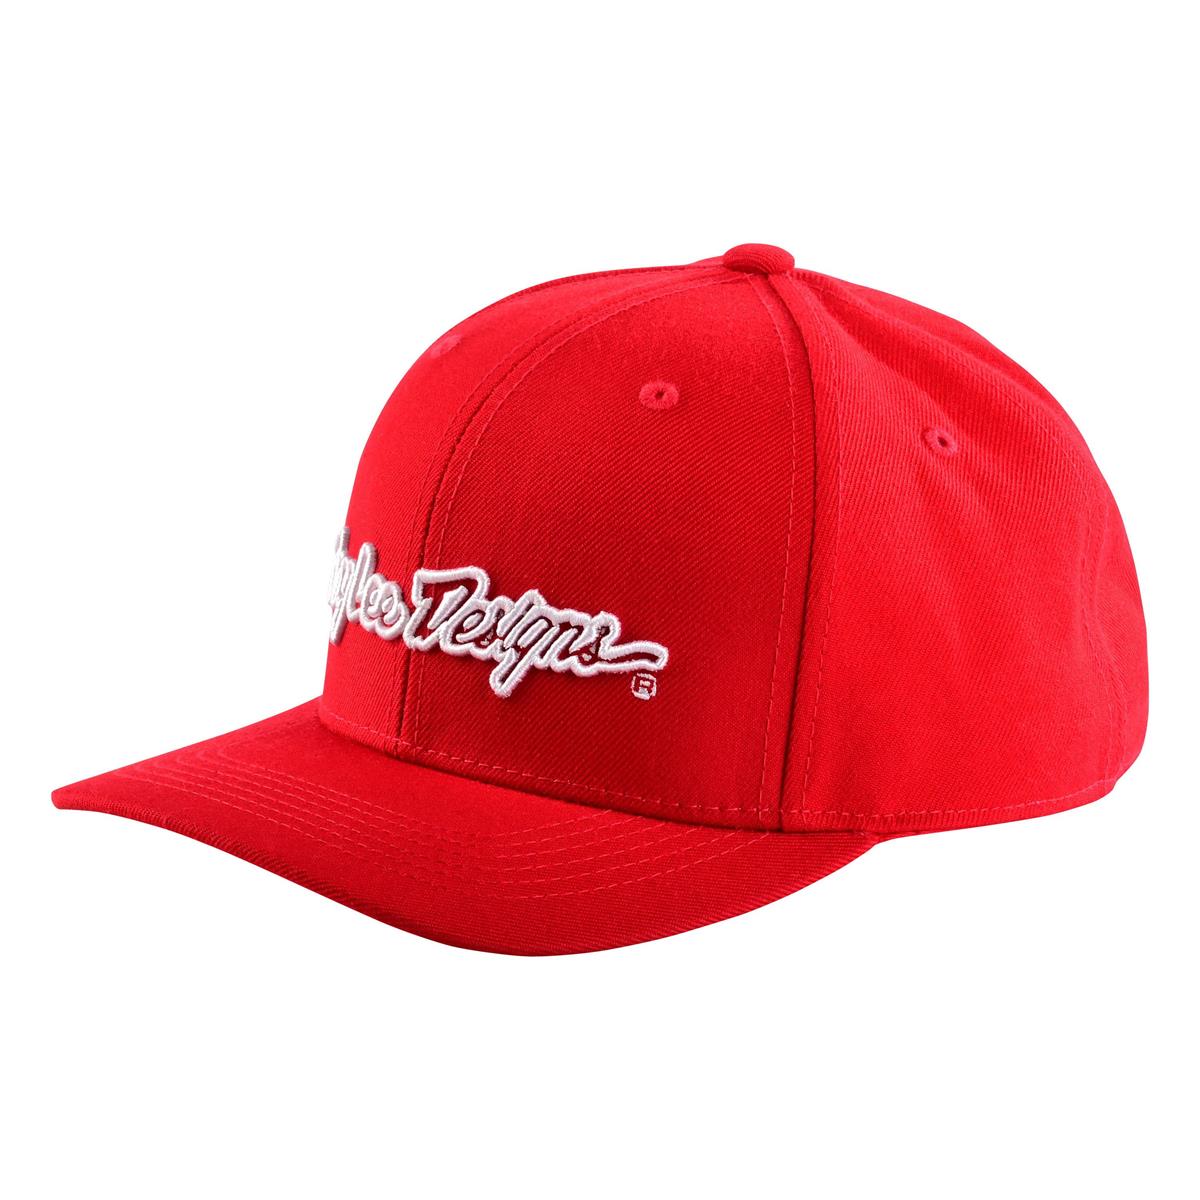 Troy Lee Designs 9Fifty Snapback Cap Signature Red/White